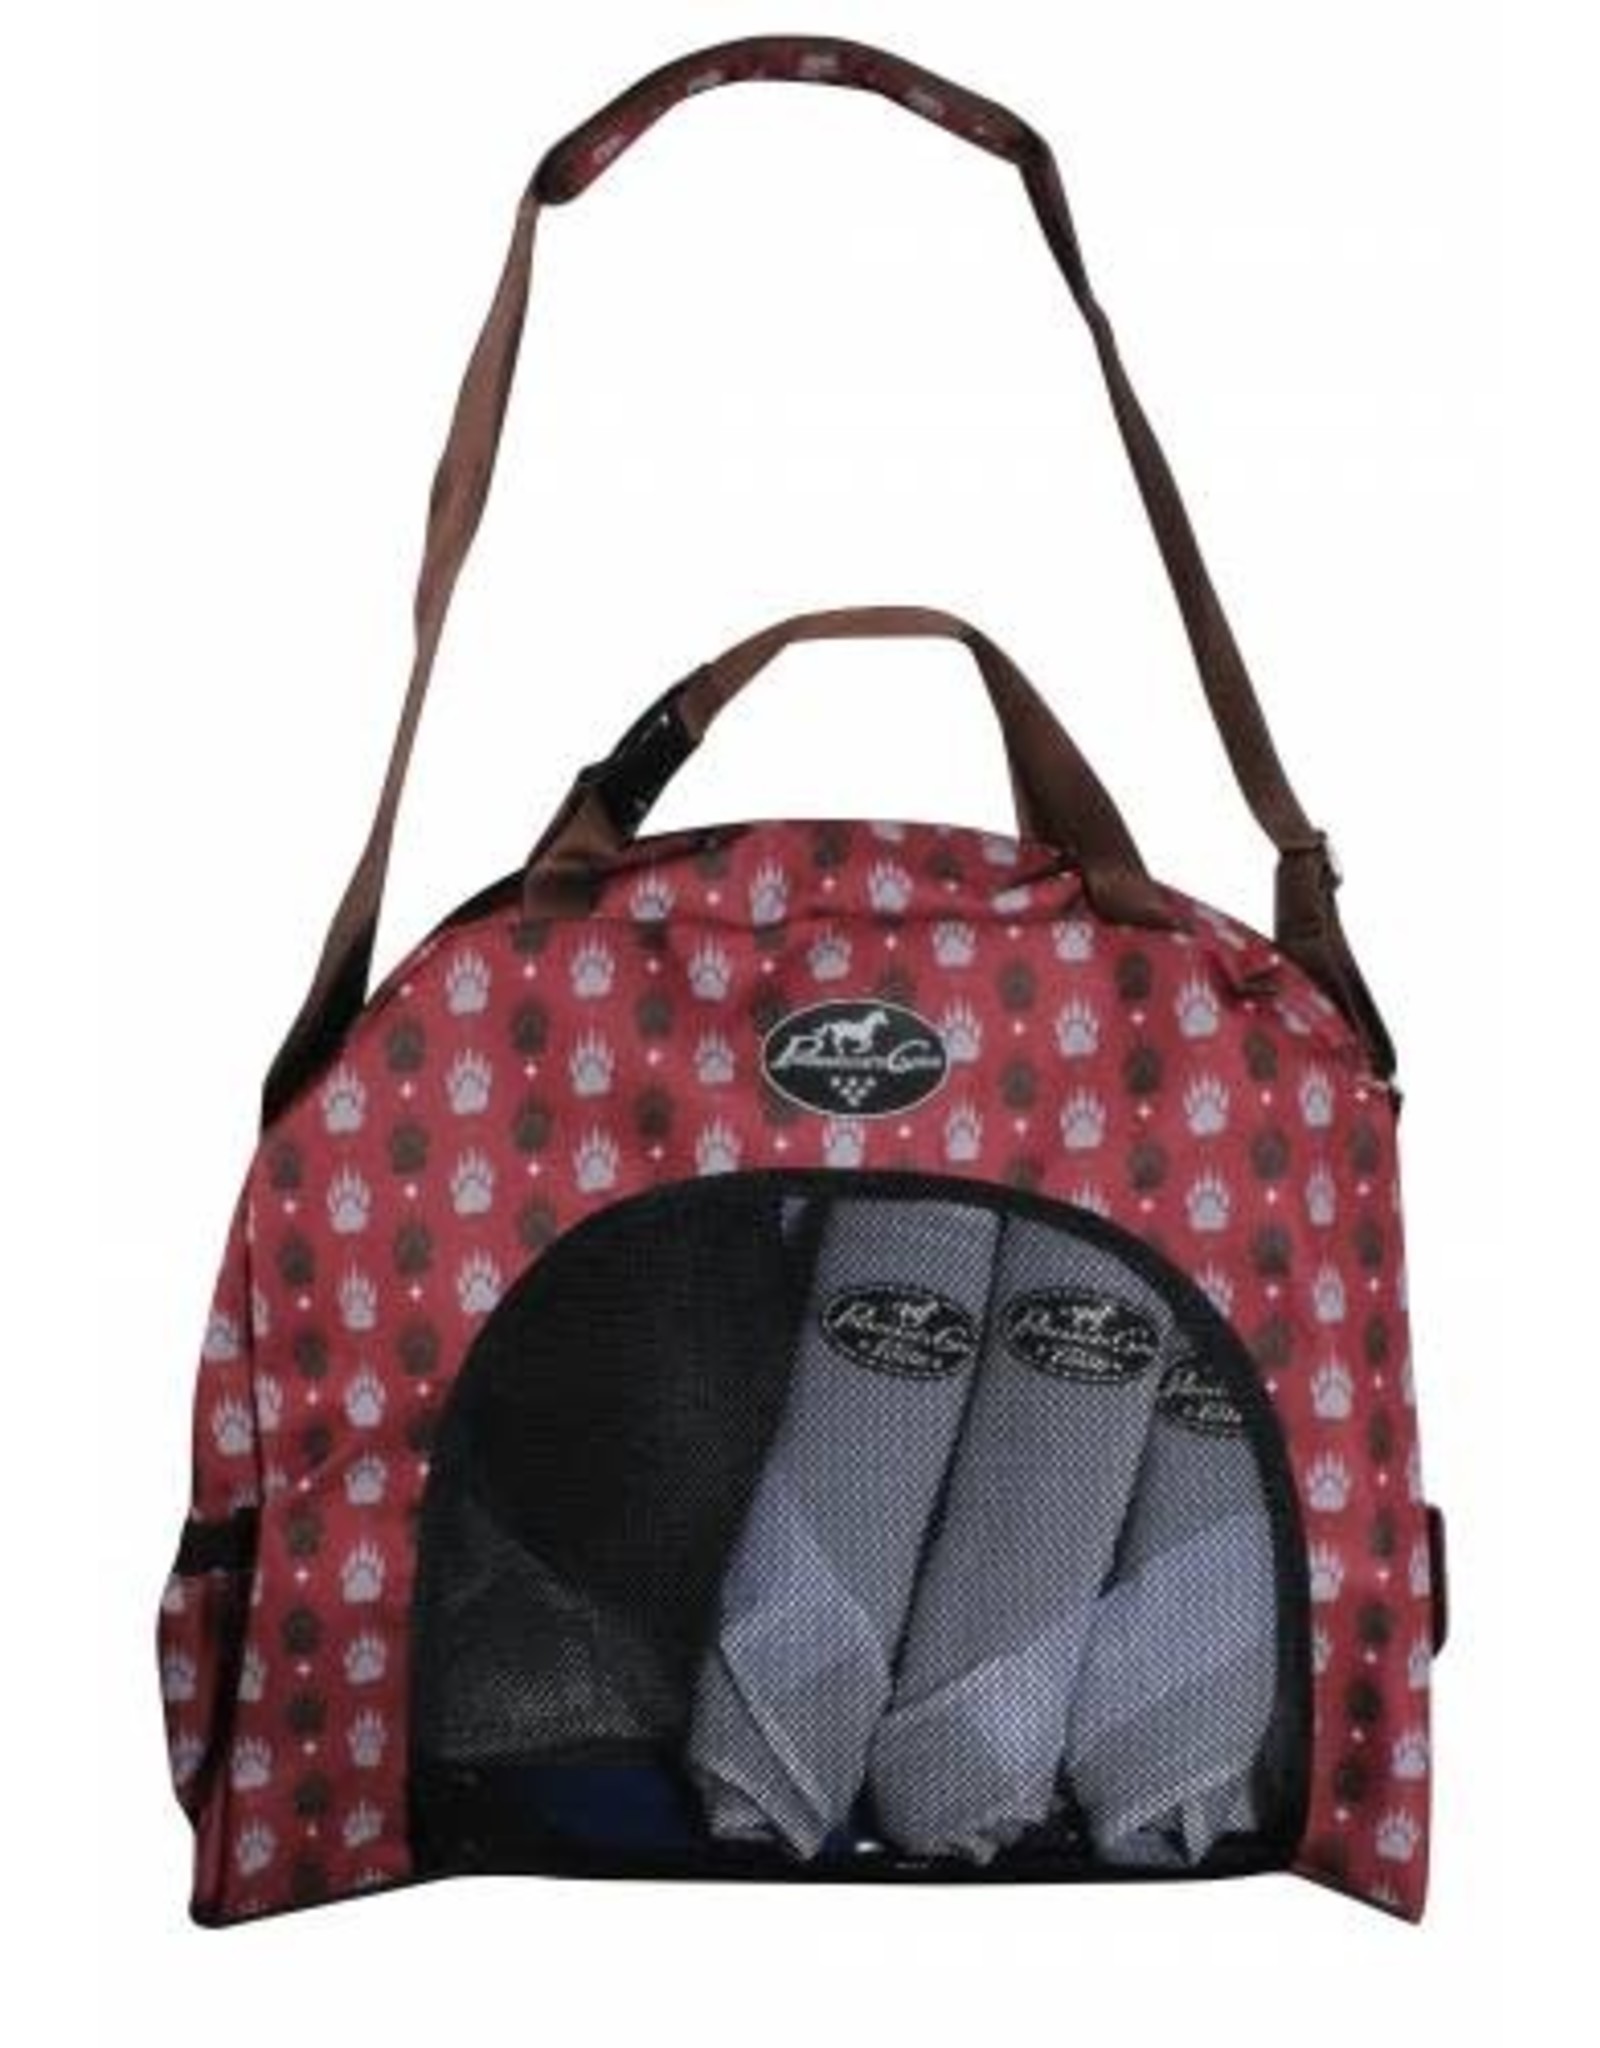 PC carry all Bag (with mesh window) 20" X 16" X 4" PCBCA Bear Paw